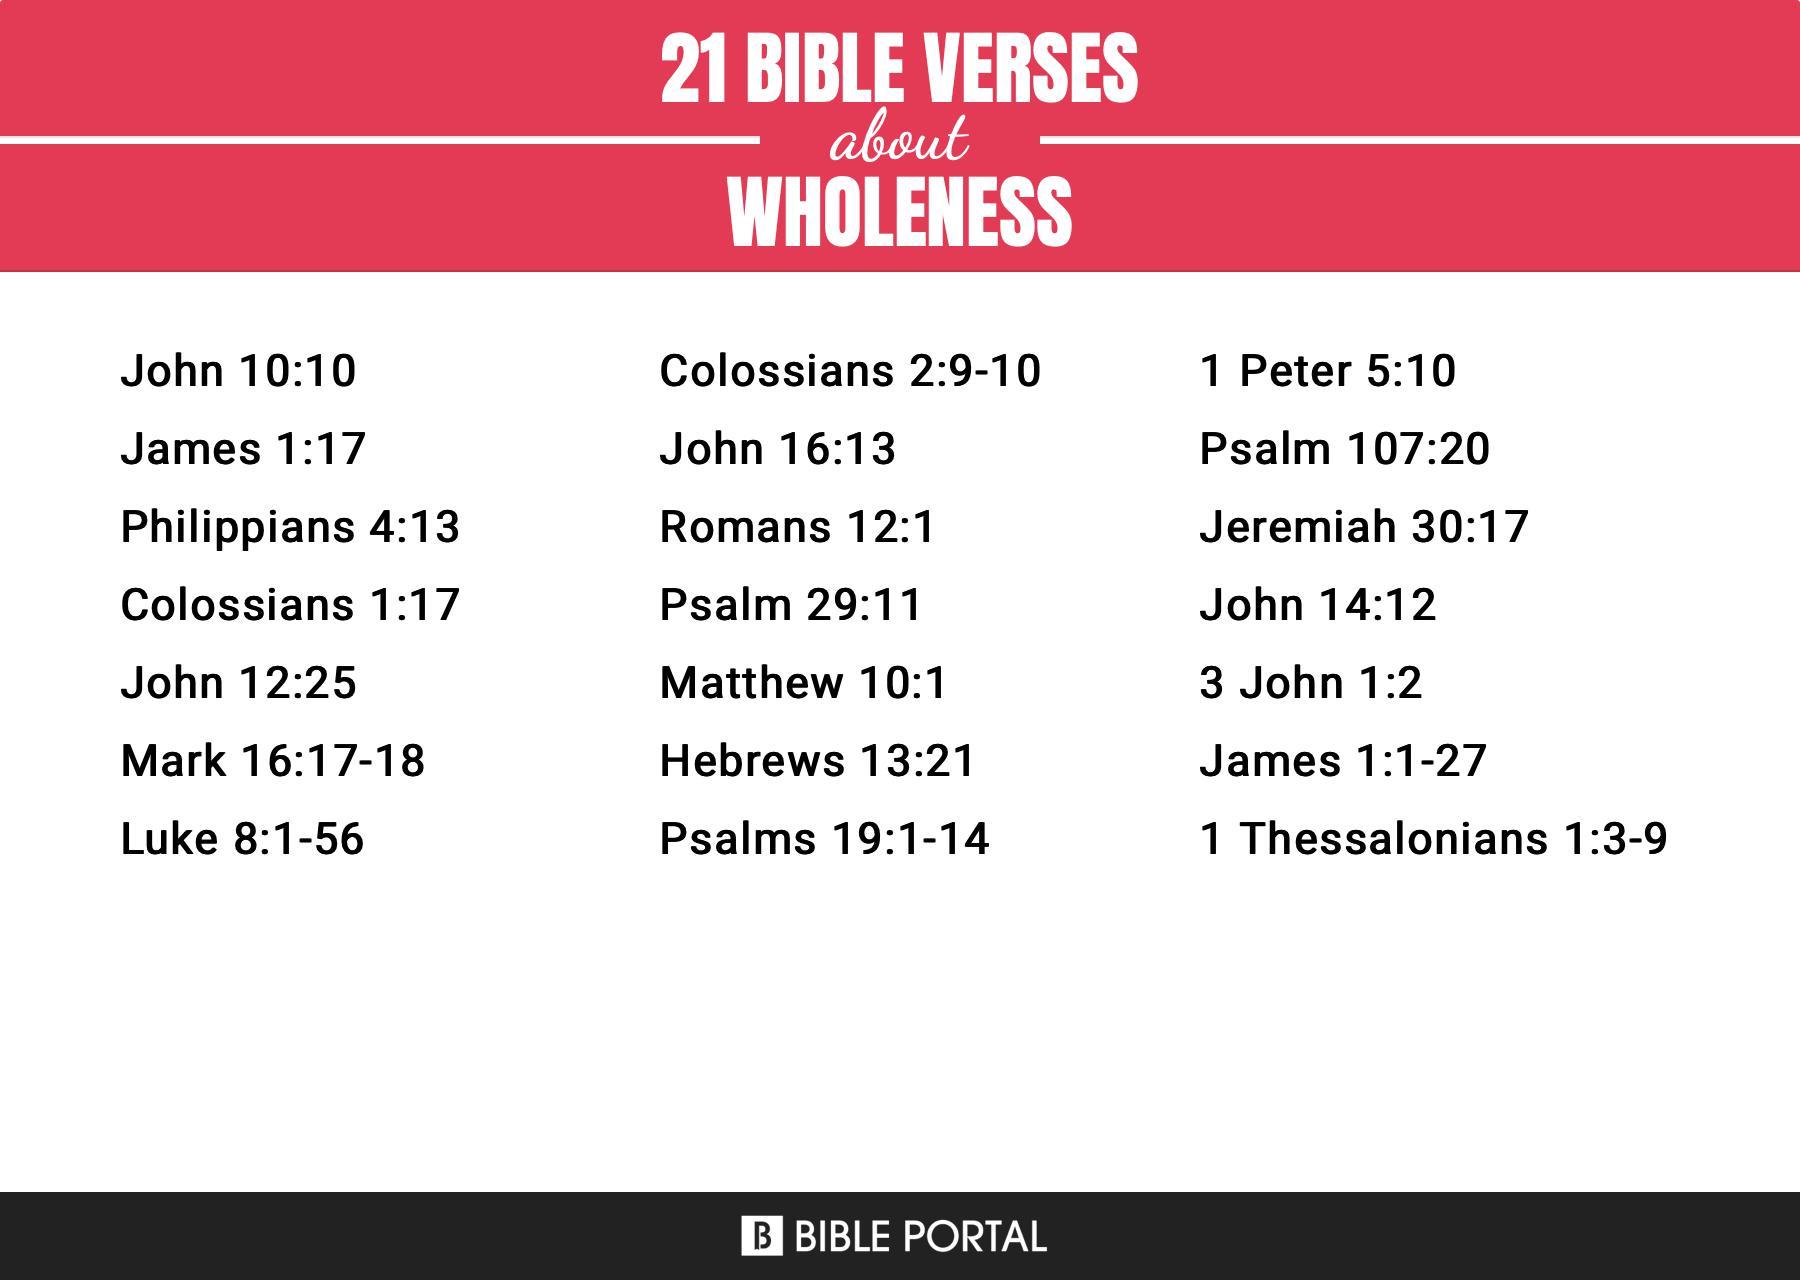 What Does the Bible Say about Wholeness?